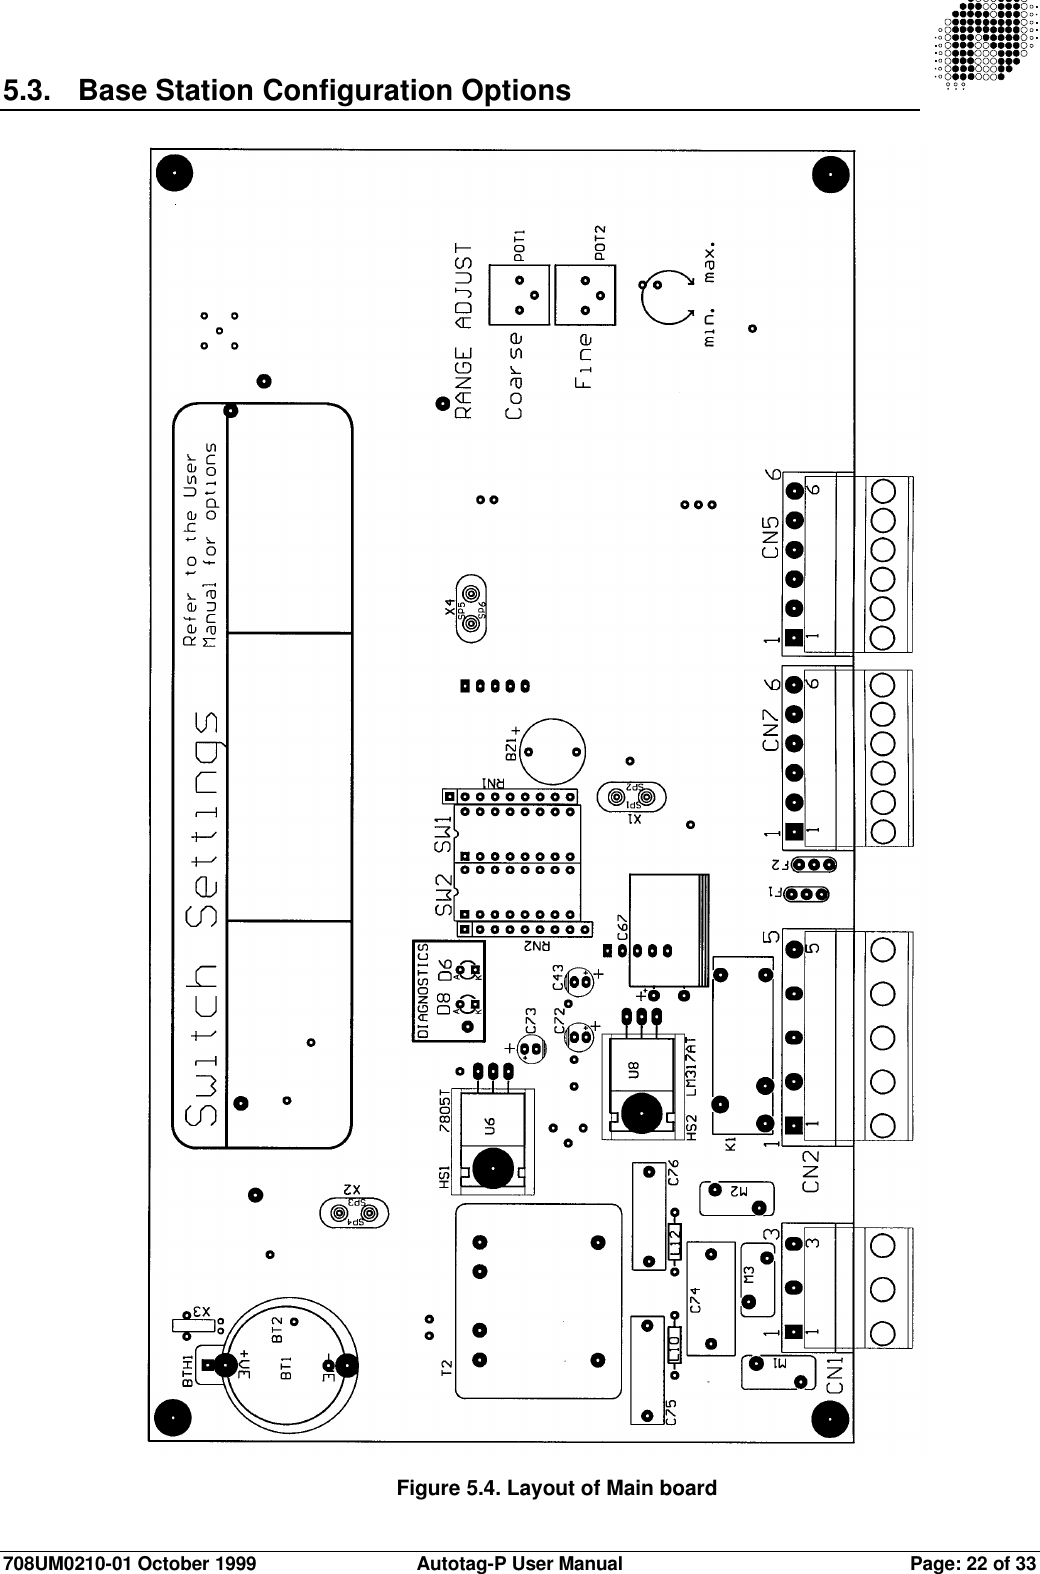 708UM0210-01 October 1999 Autotag-P User Manual Page: 22 of 335.3. Base Station Configuration OptionsFigure 5.4. Layout of Main board